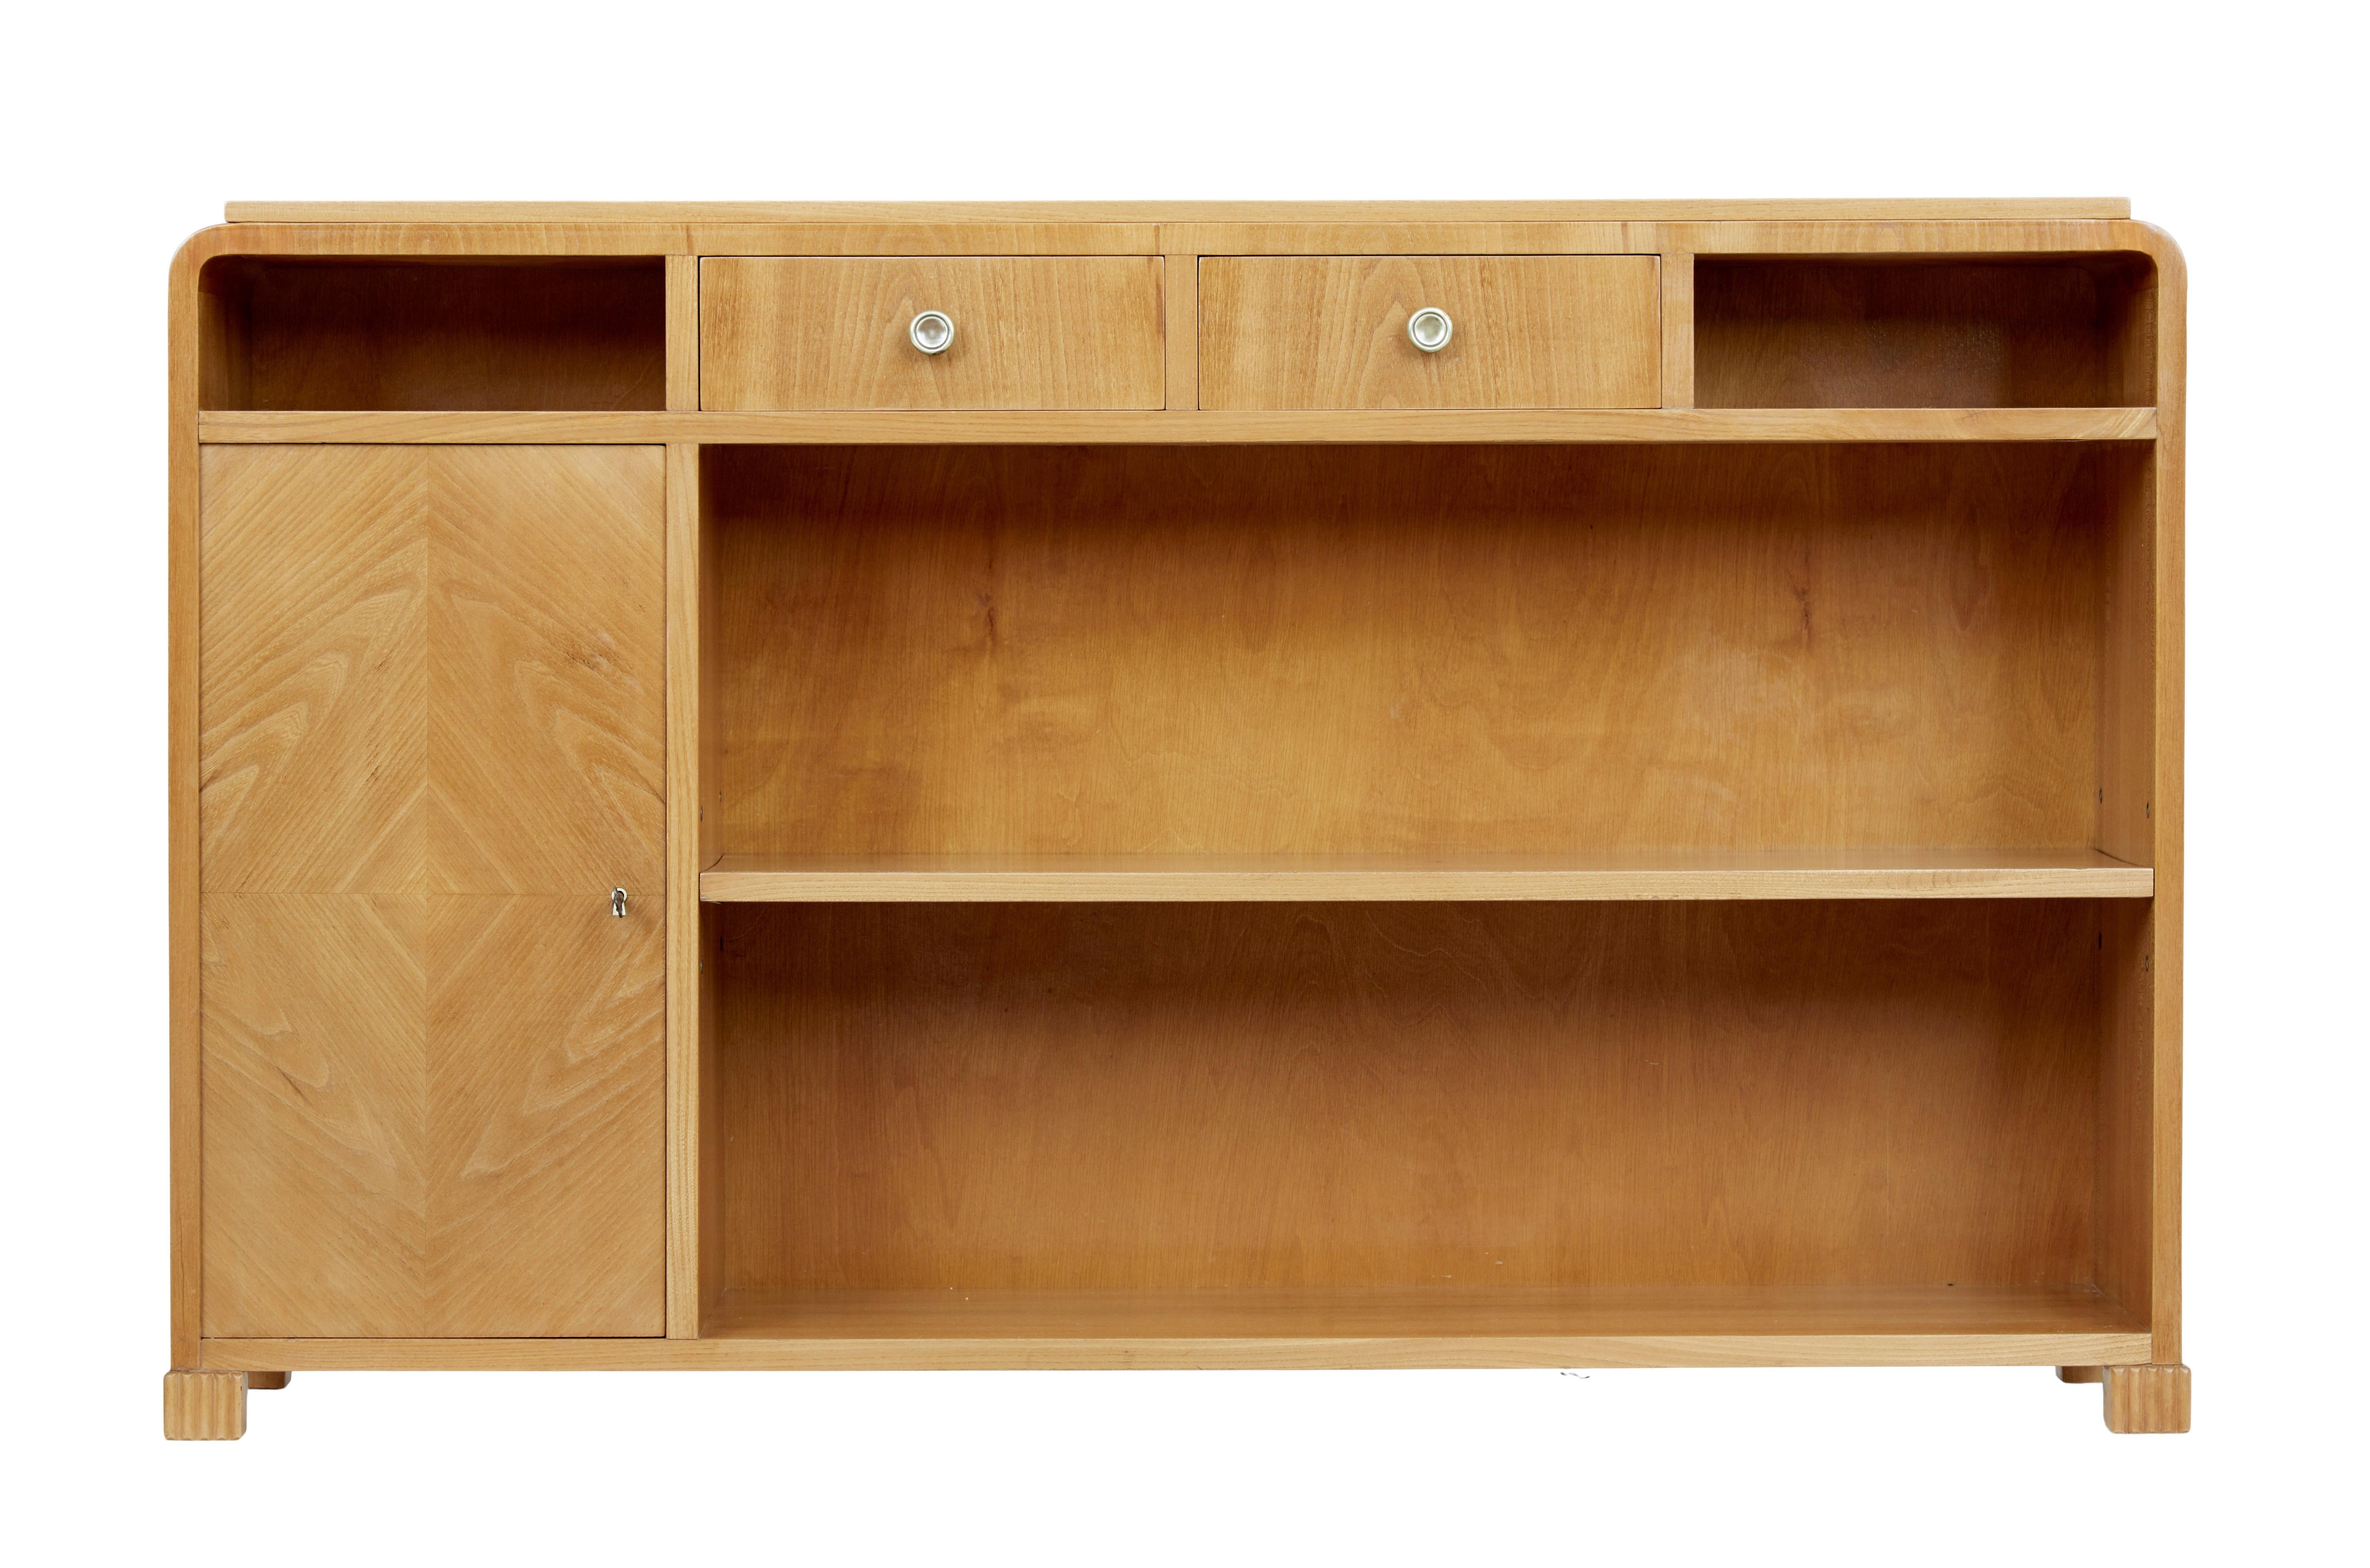 Scandinavian mid-20th century elm low bookcase, circa 1950.

Good quality Swedish elm bookcase with a cupboard. Art Deco inspired stepped top surface, below which are 2 drawers flanked either side with a pigeon holes for storage.

Main open